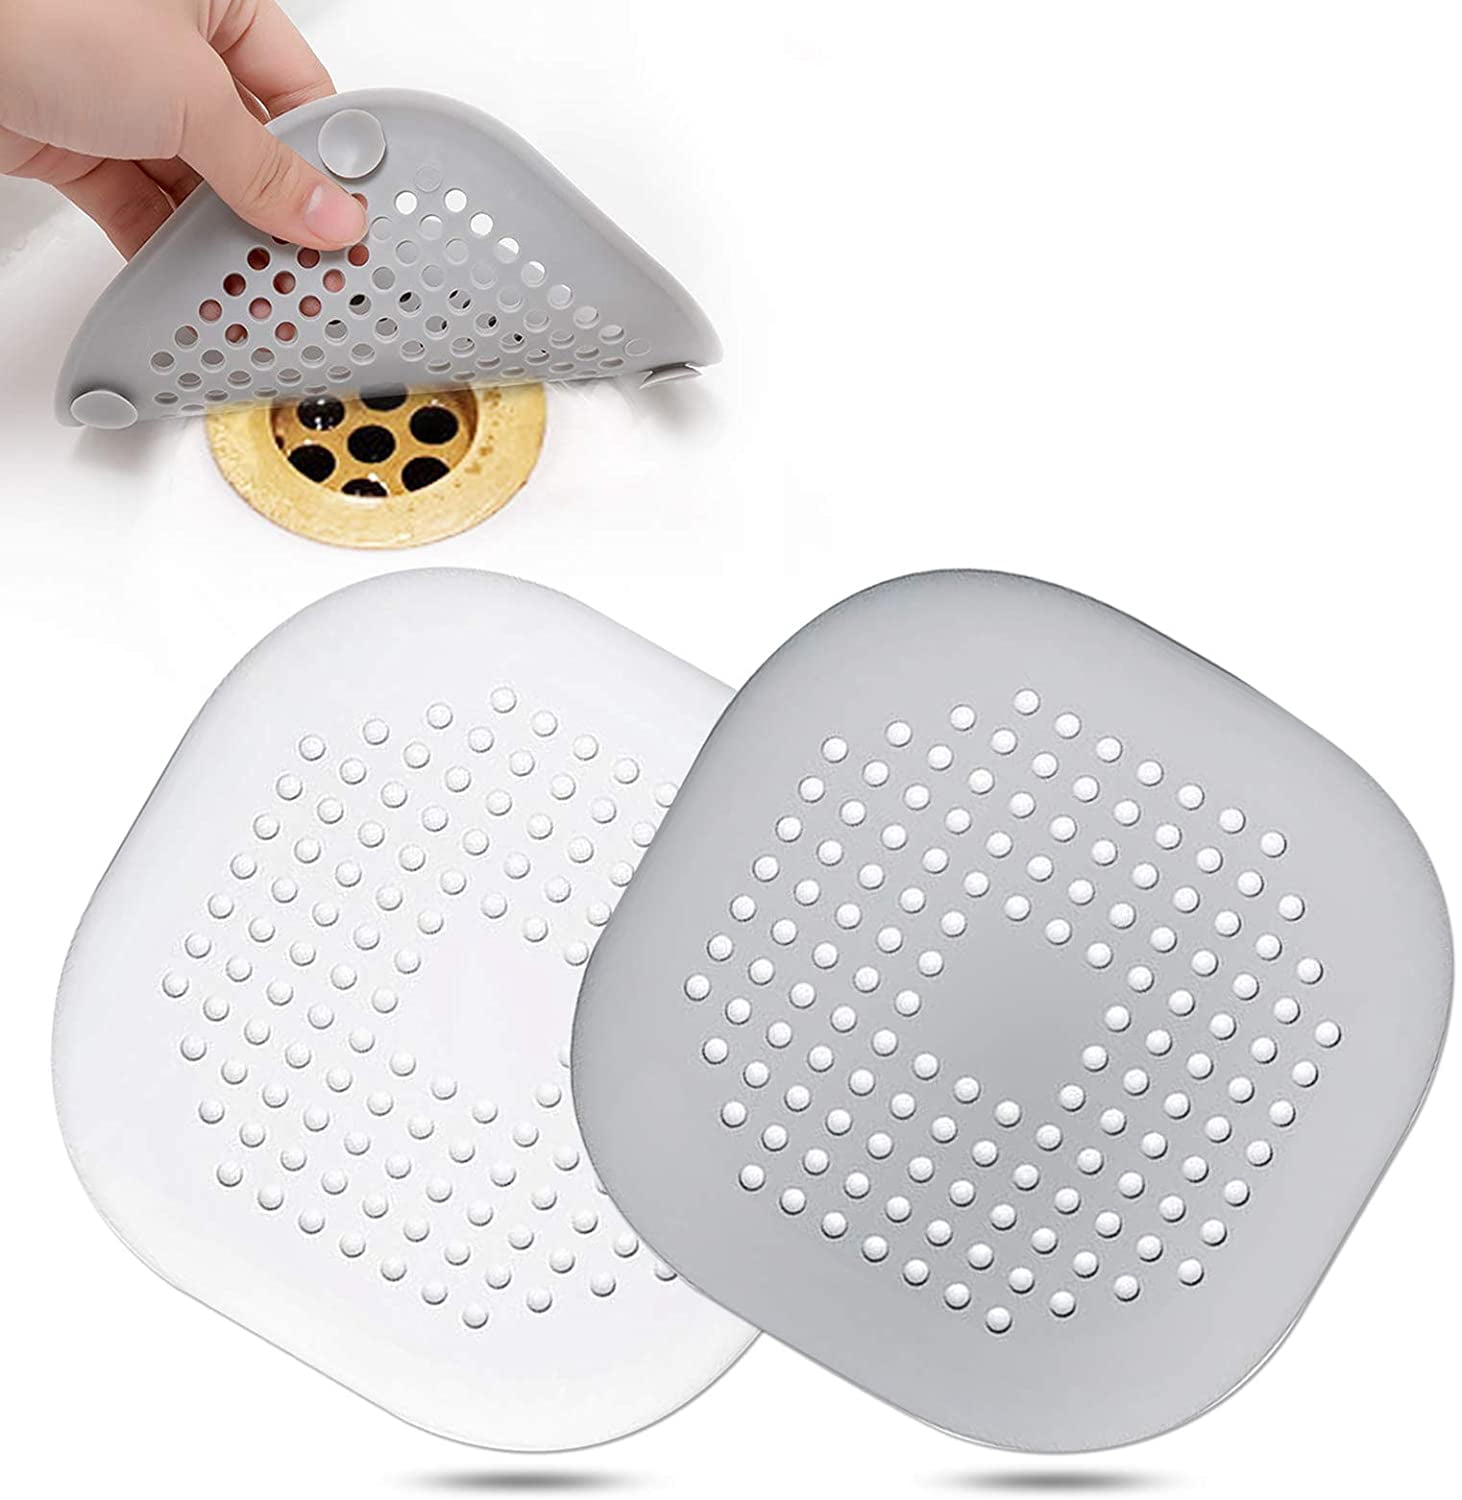 Big Shower Drain Hair Catcher Bathroom Shower Drain Cover Kitchen Sink Strainer Silicone with Suction Cup Easy to Install and Clean for Kitchen and Bathroom 4 Pcs 